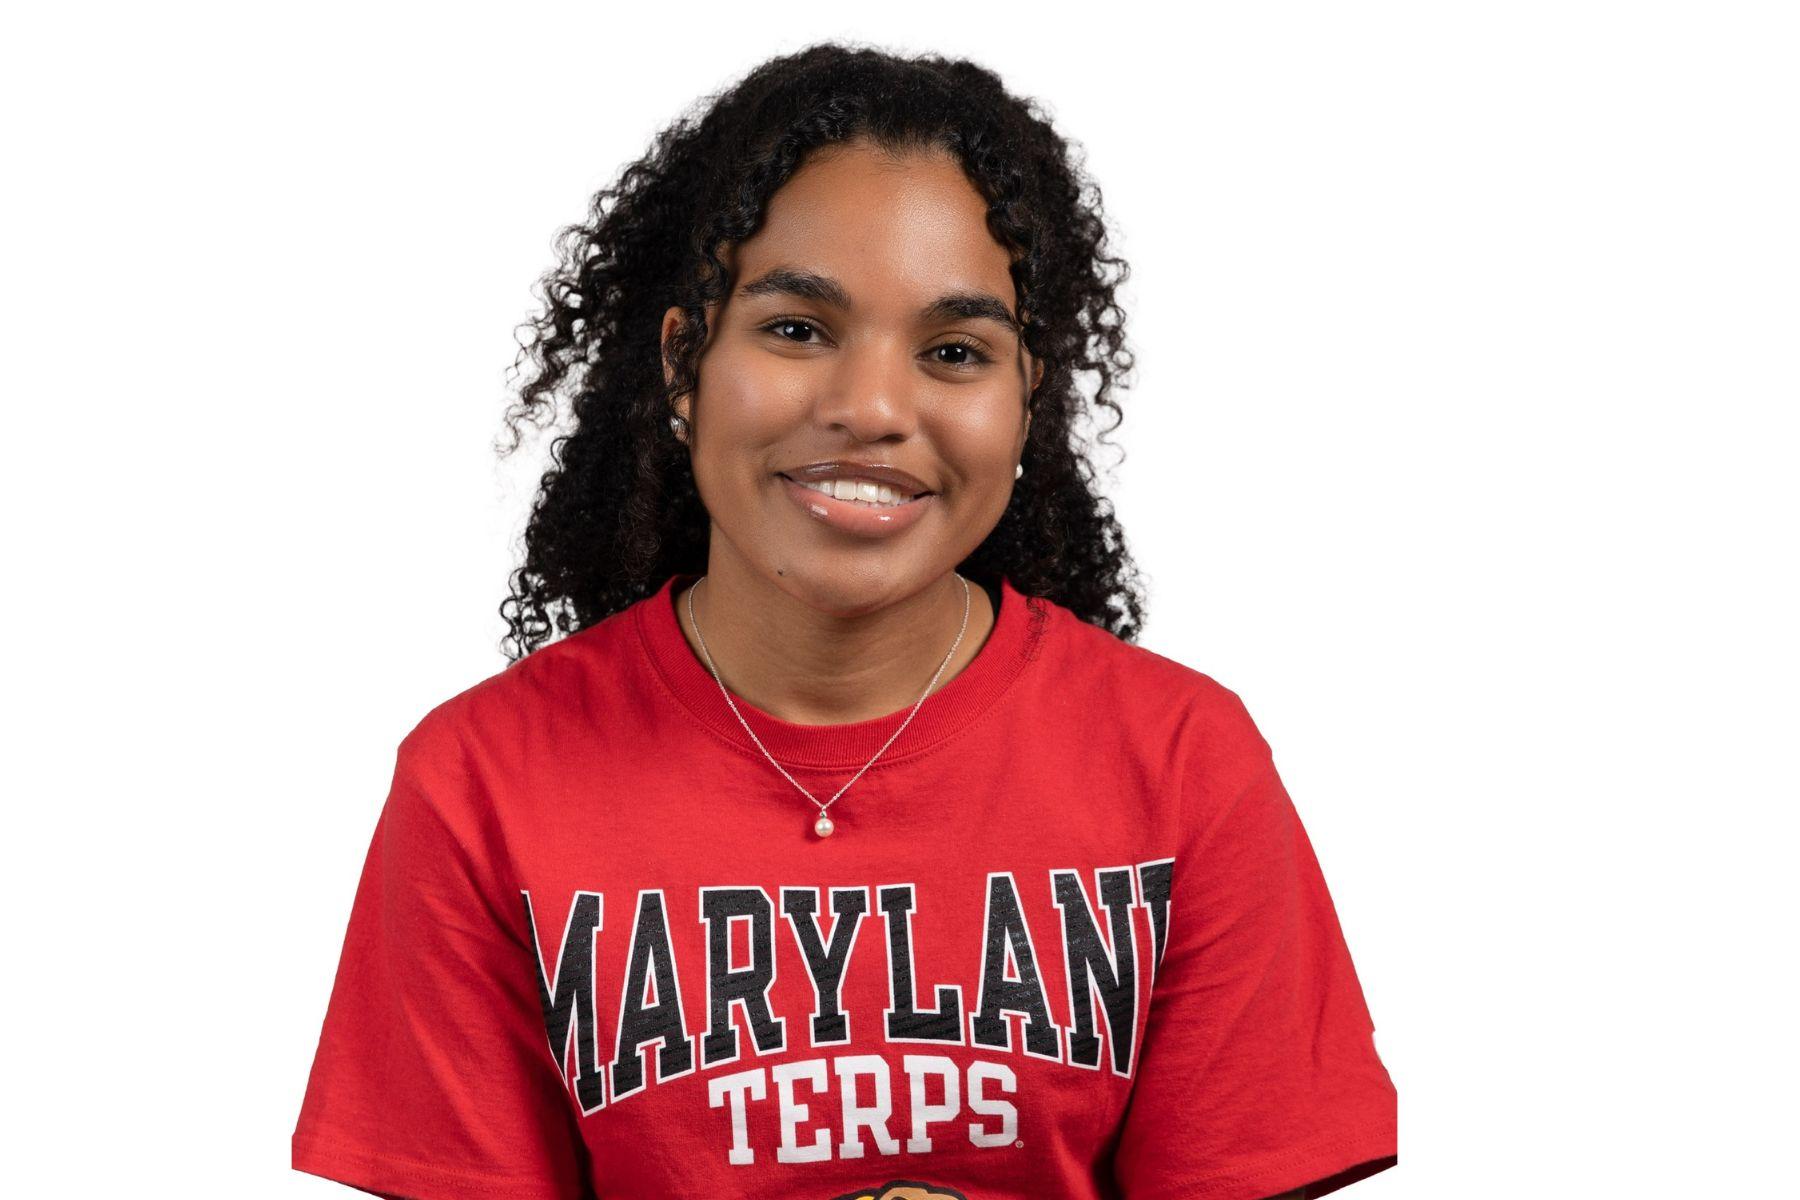 Nadia is wearing a red Maryland shirt and smiling at the camera